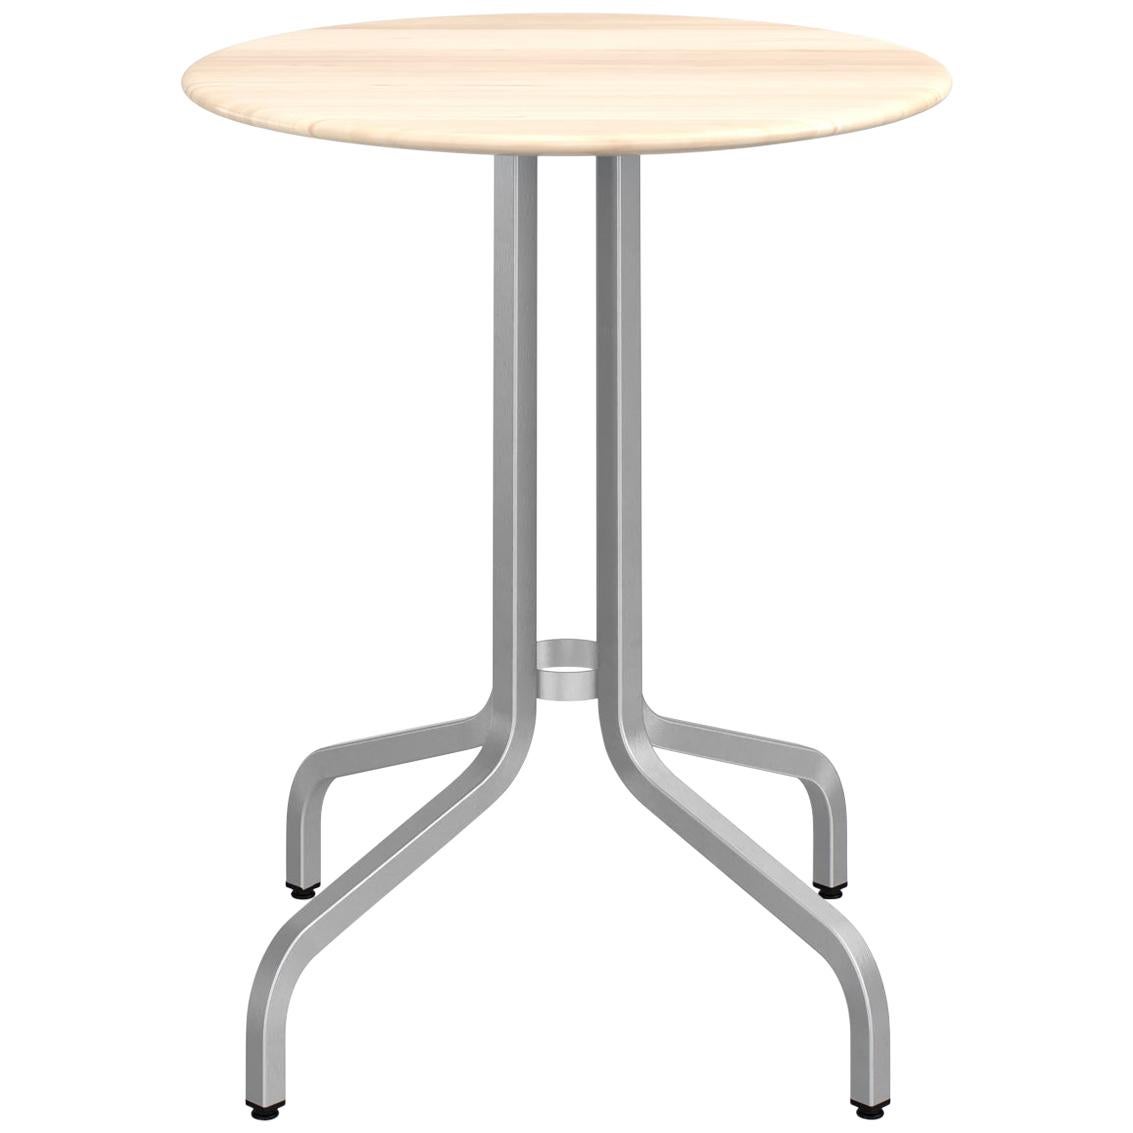 Emeco 1 Inch Small Round Aluminum Cafe Table with Wood Top by Jasper Morrison